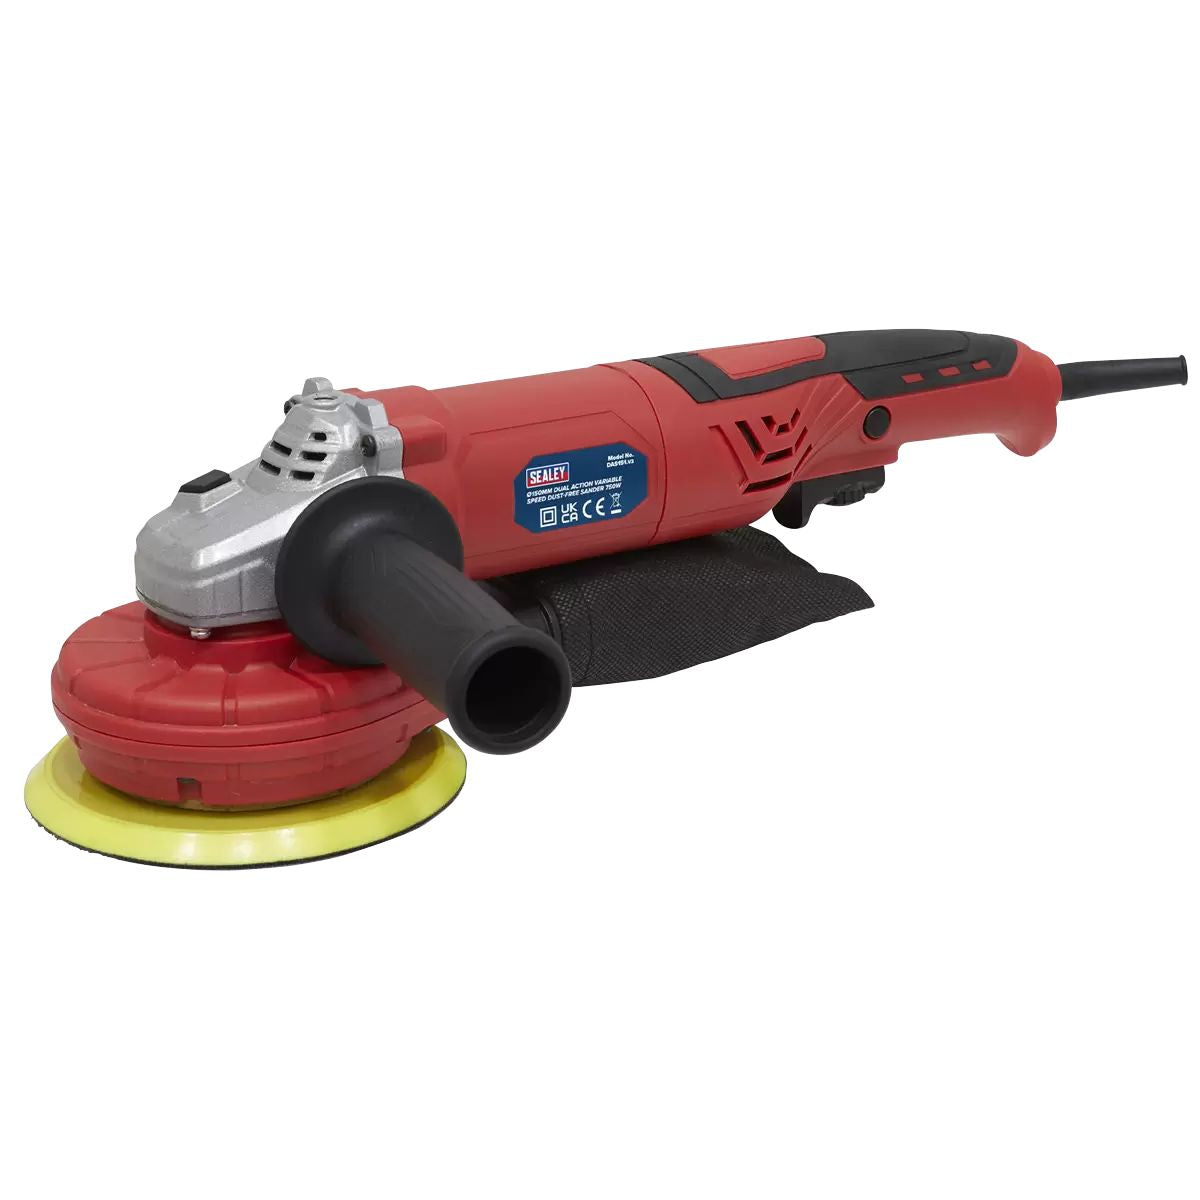 Sealey DAS151 Ø150mm Dual Action Variable Speed Dust-Free Sander 230V/750W